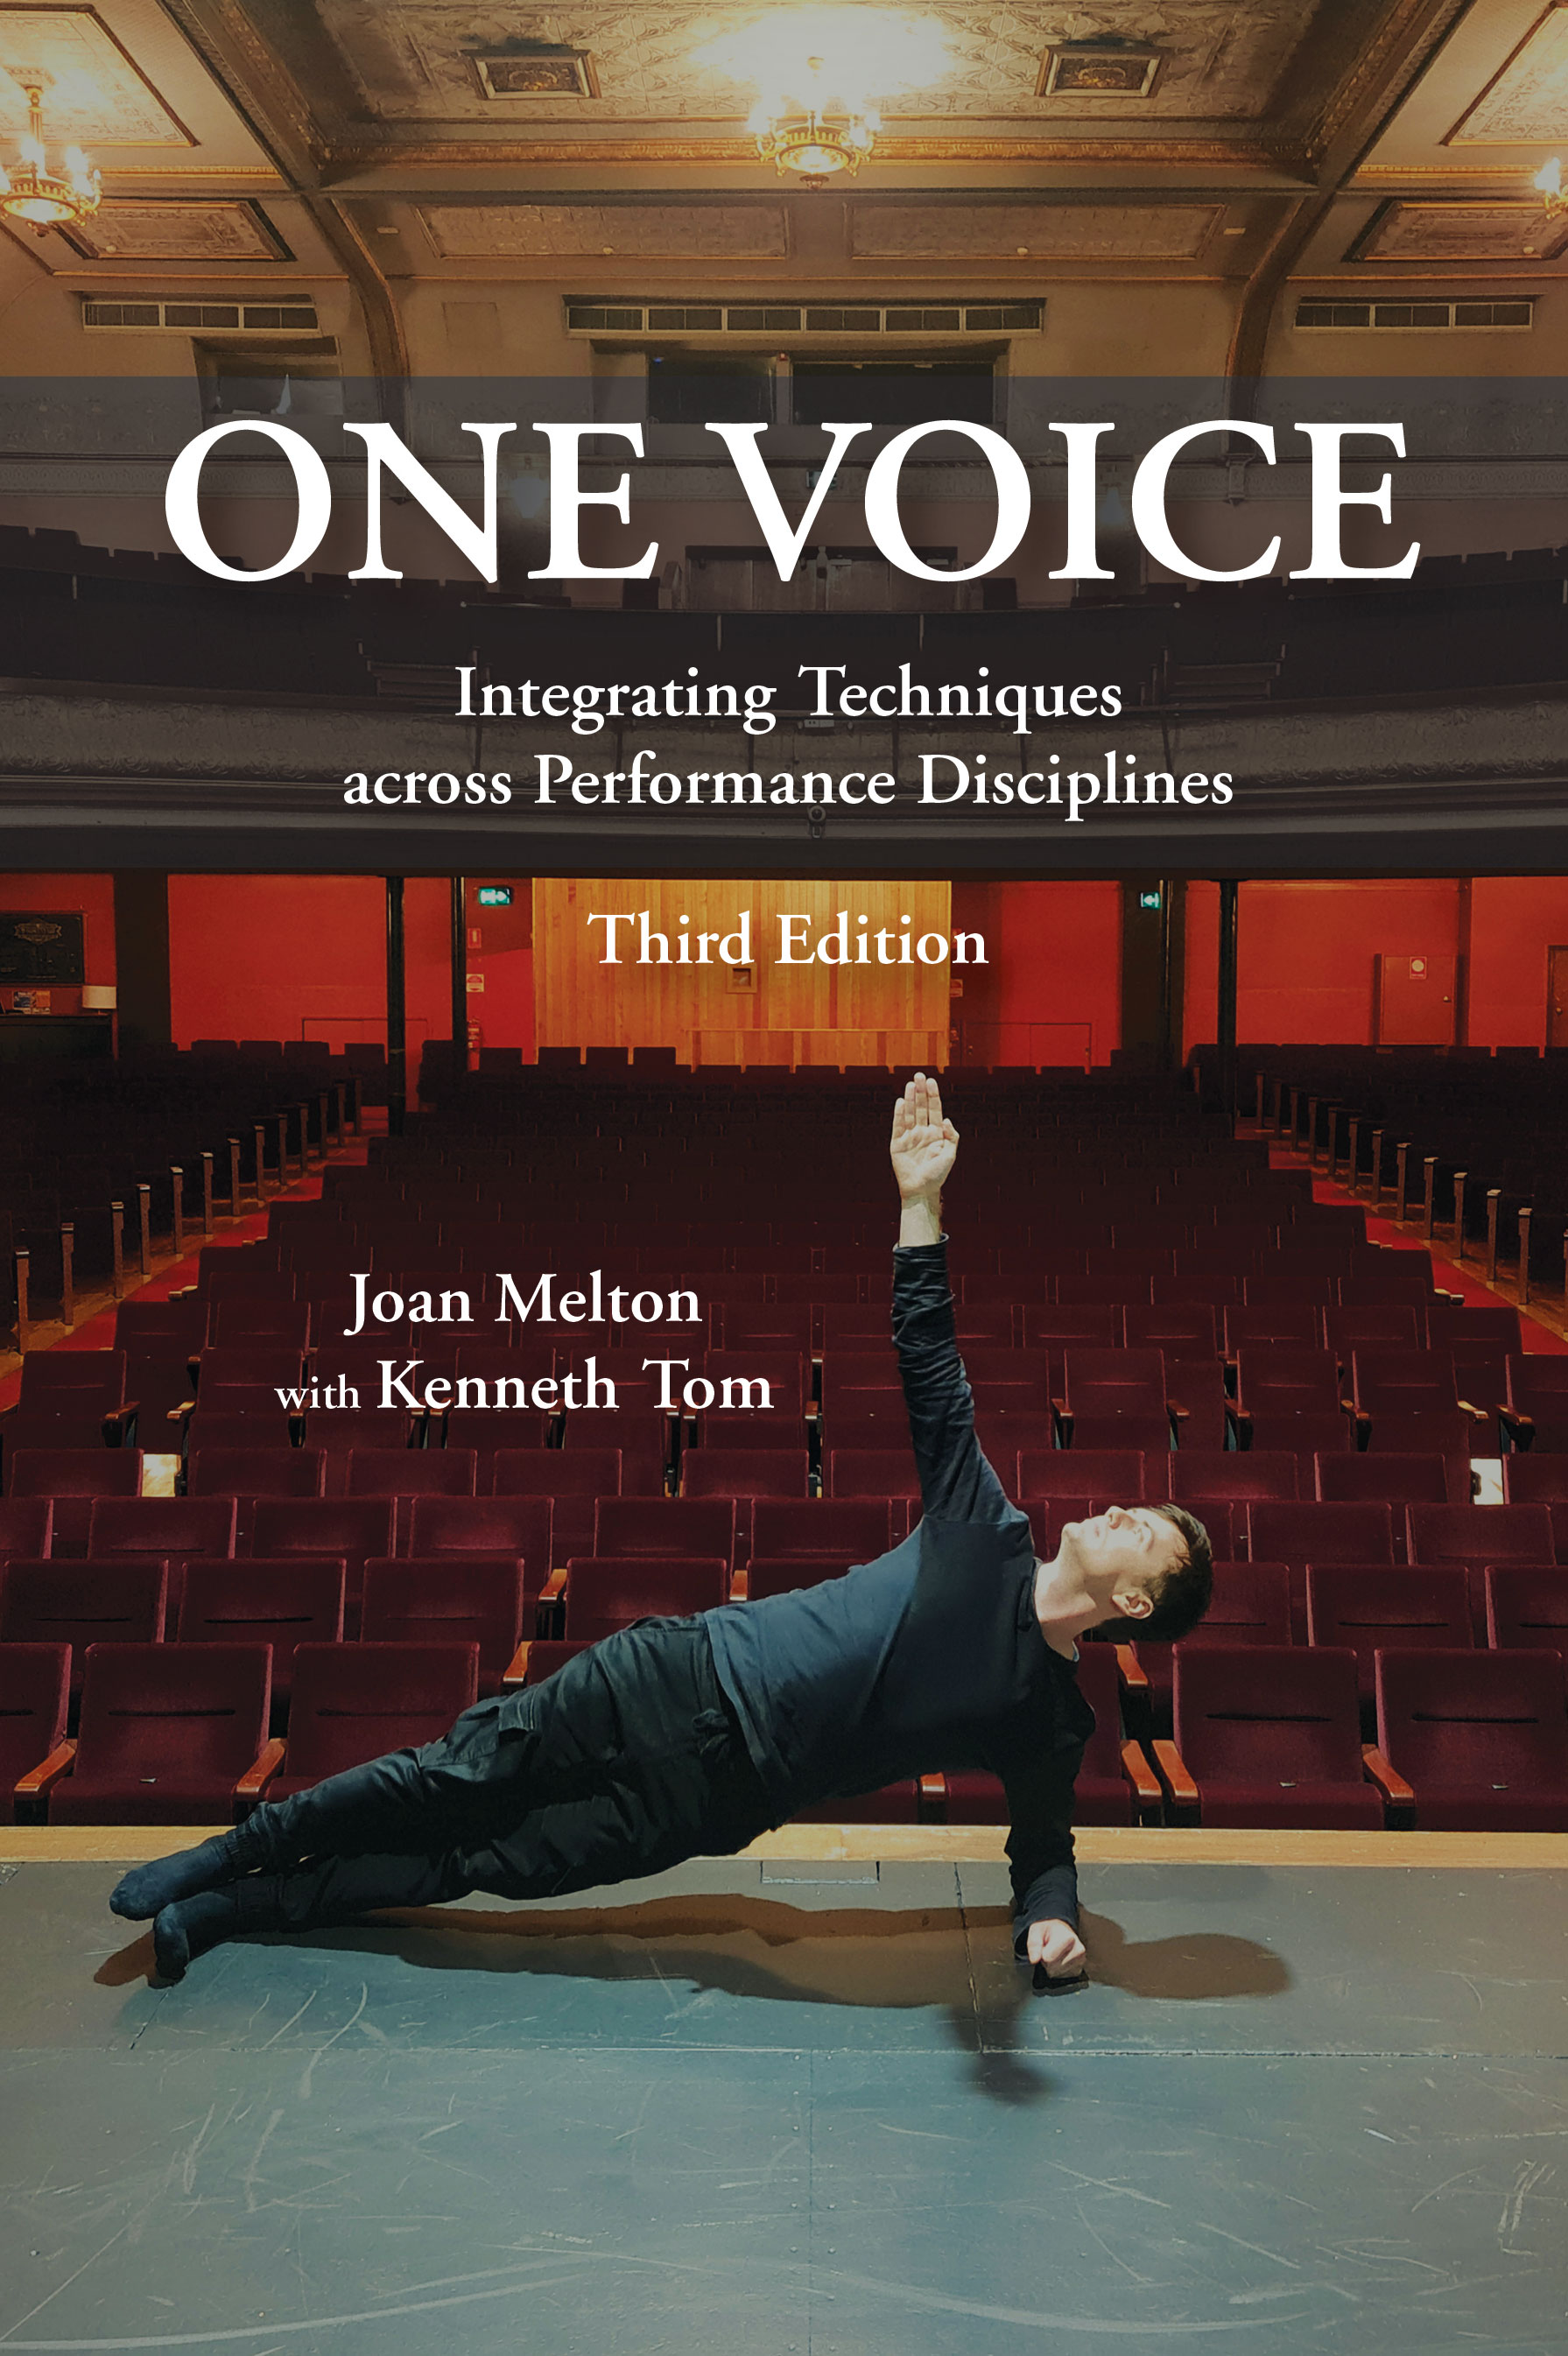 One Voice: Integrating Techniques across Performance Disciplines, Third Edition by Joan  Melton with Kenneth  Tom